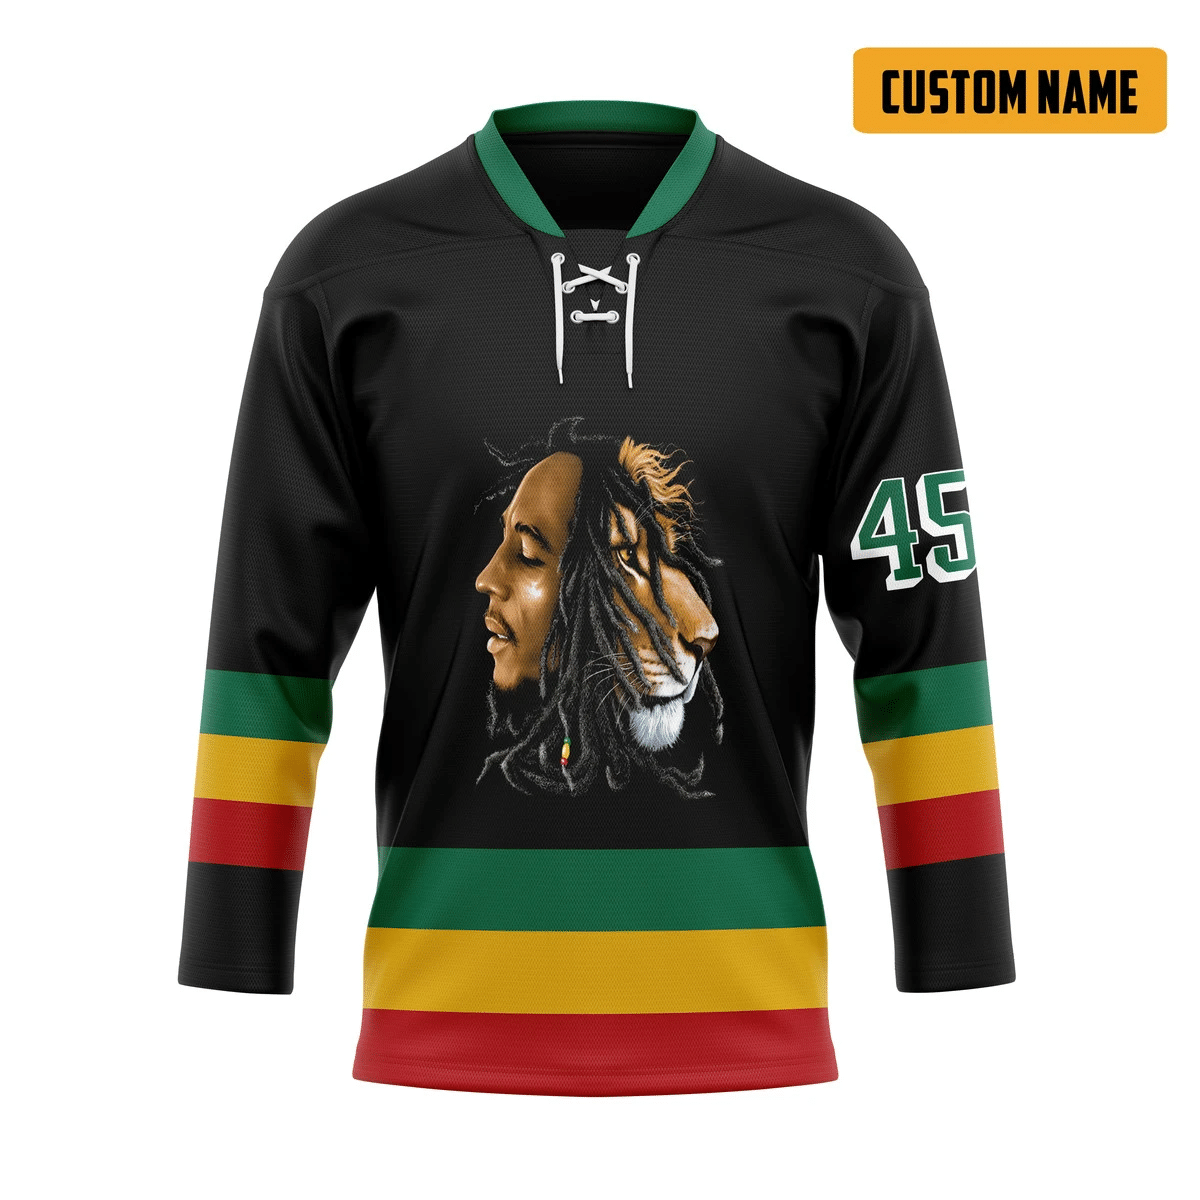 Top hot hockey jersey for NHL fans You can find out more at the bottom of the page! 141